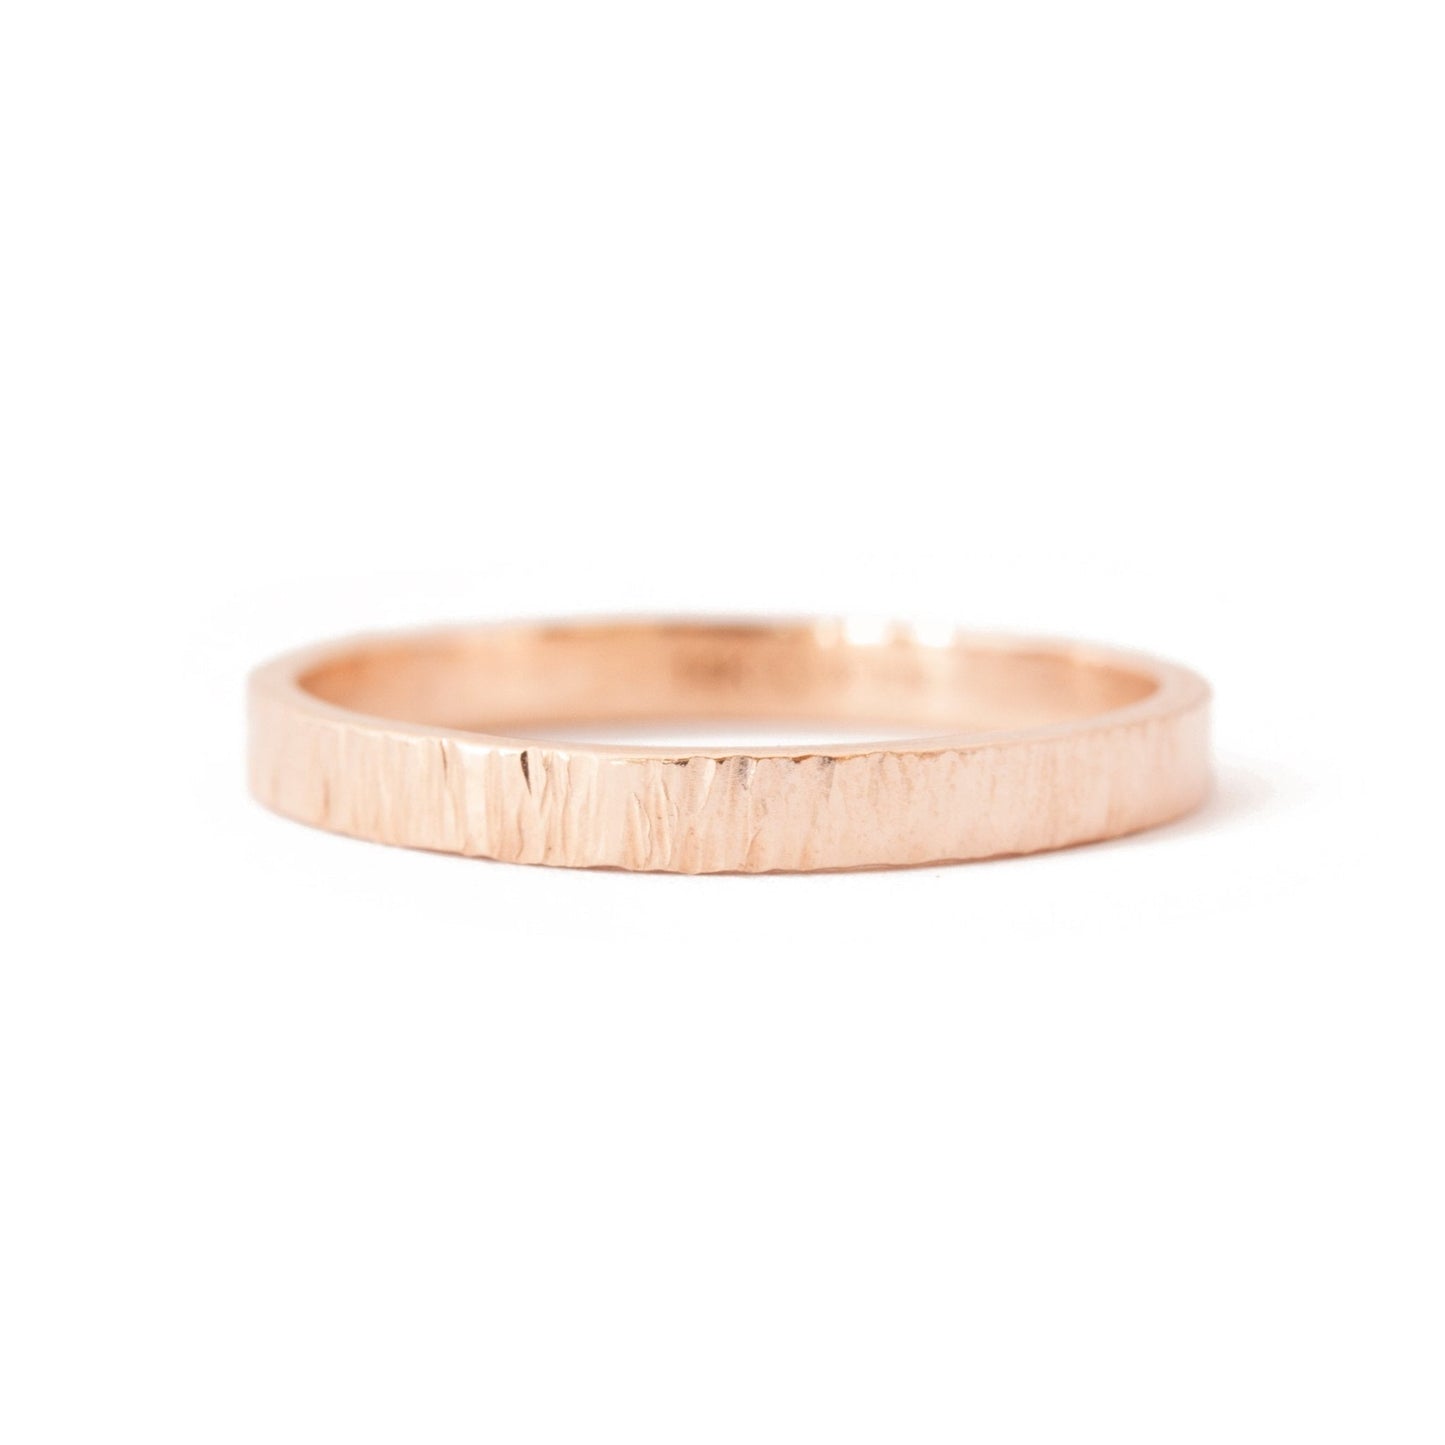 The Thatched Band (Ready to ship in 5mm width 14K rose gold size 10) - W.R. Metalarts